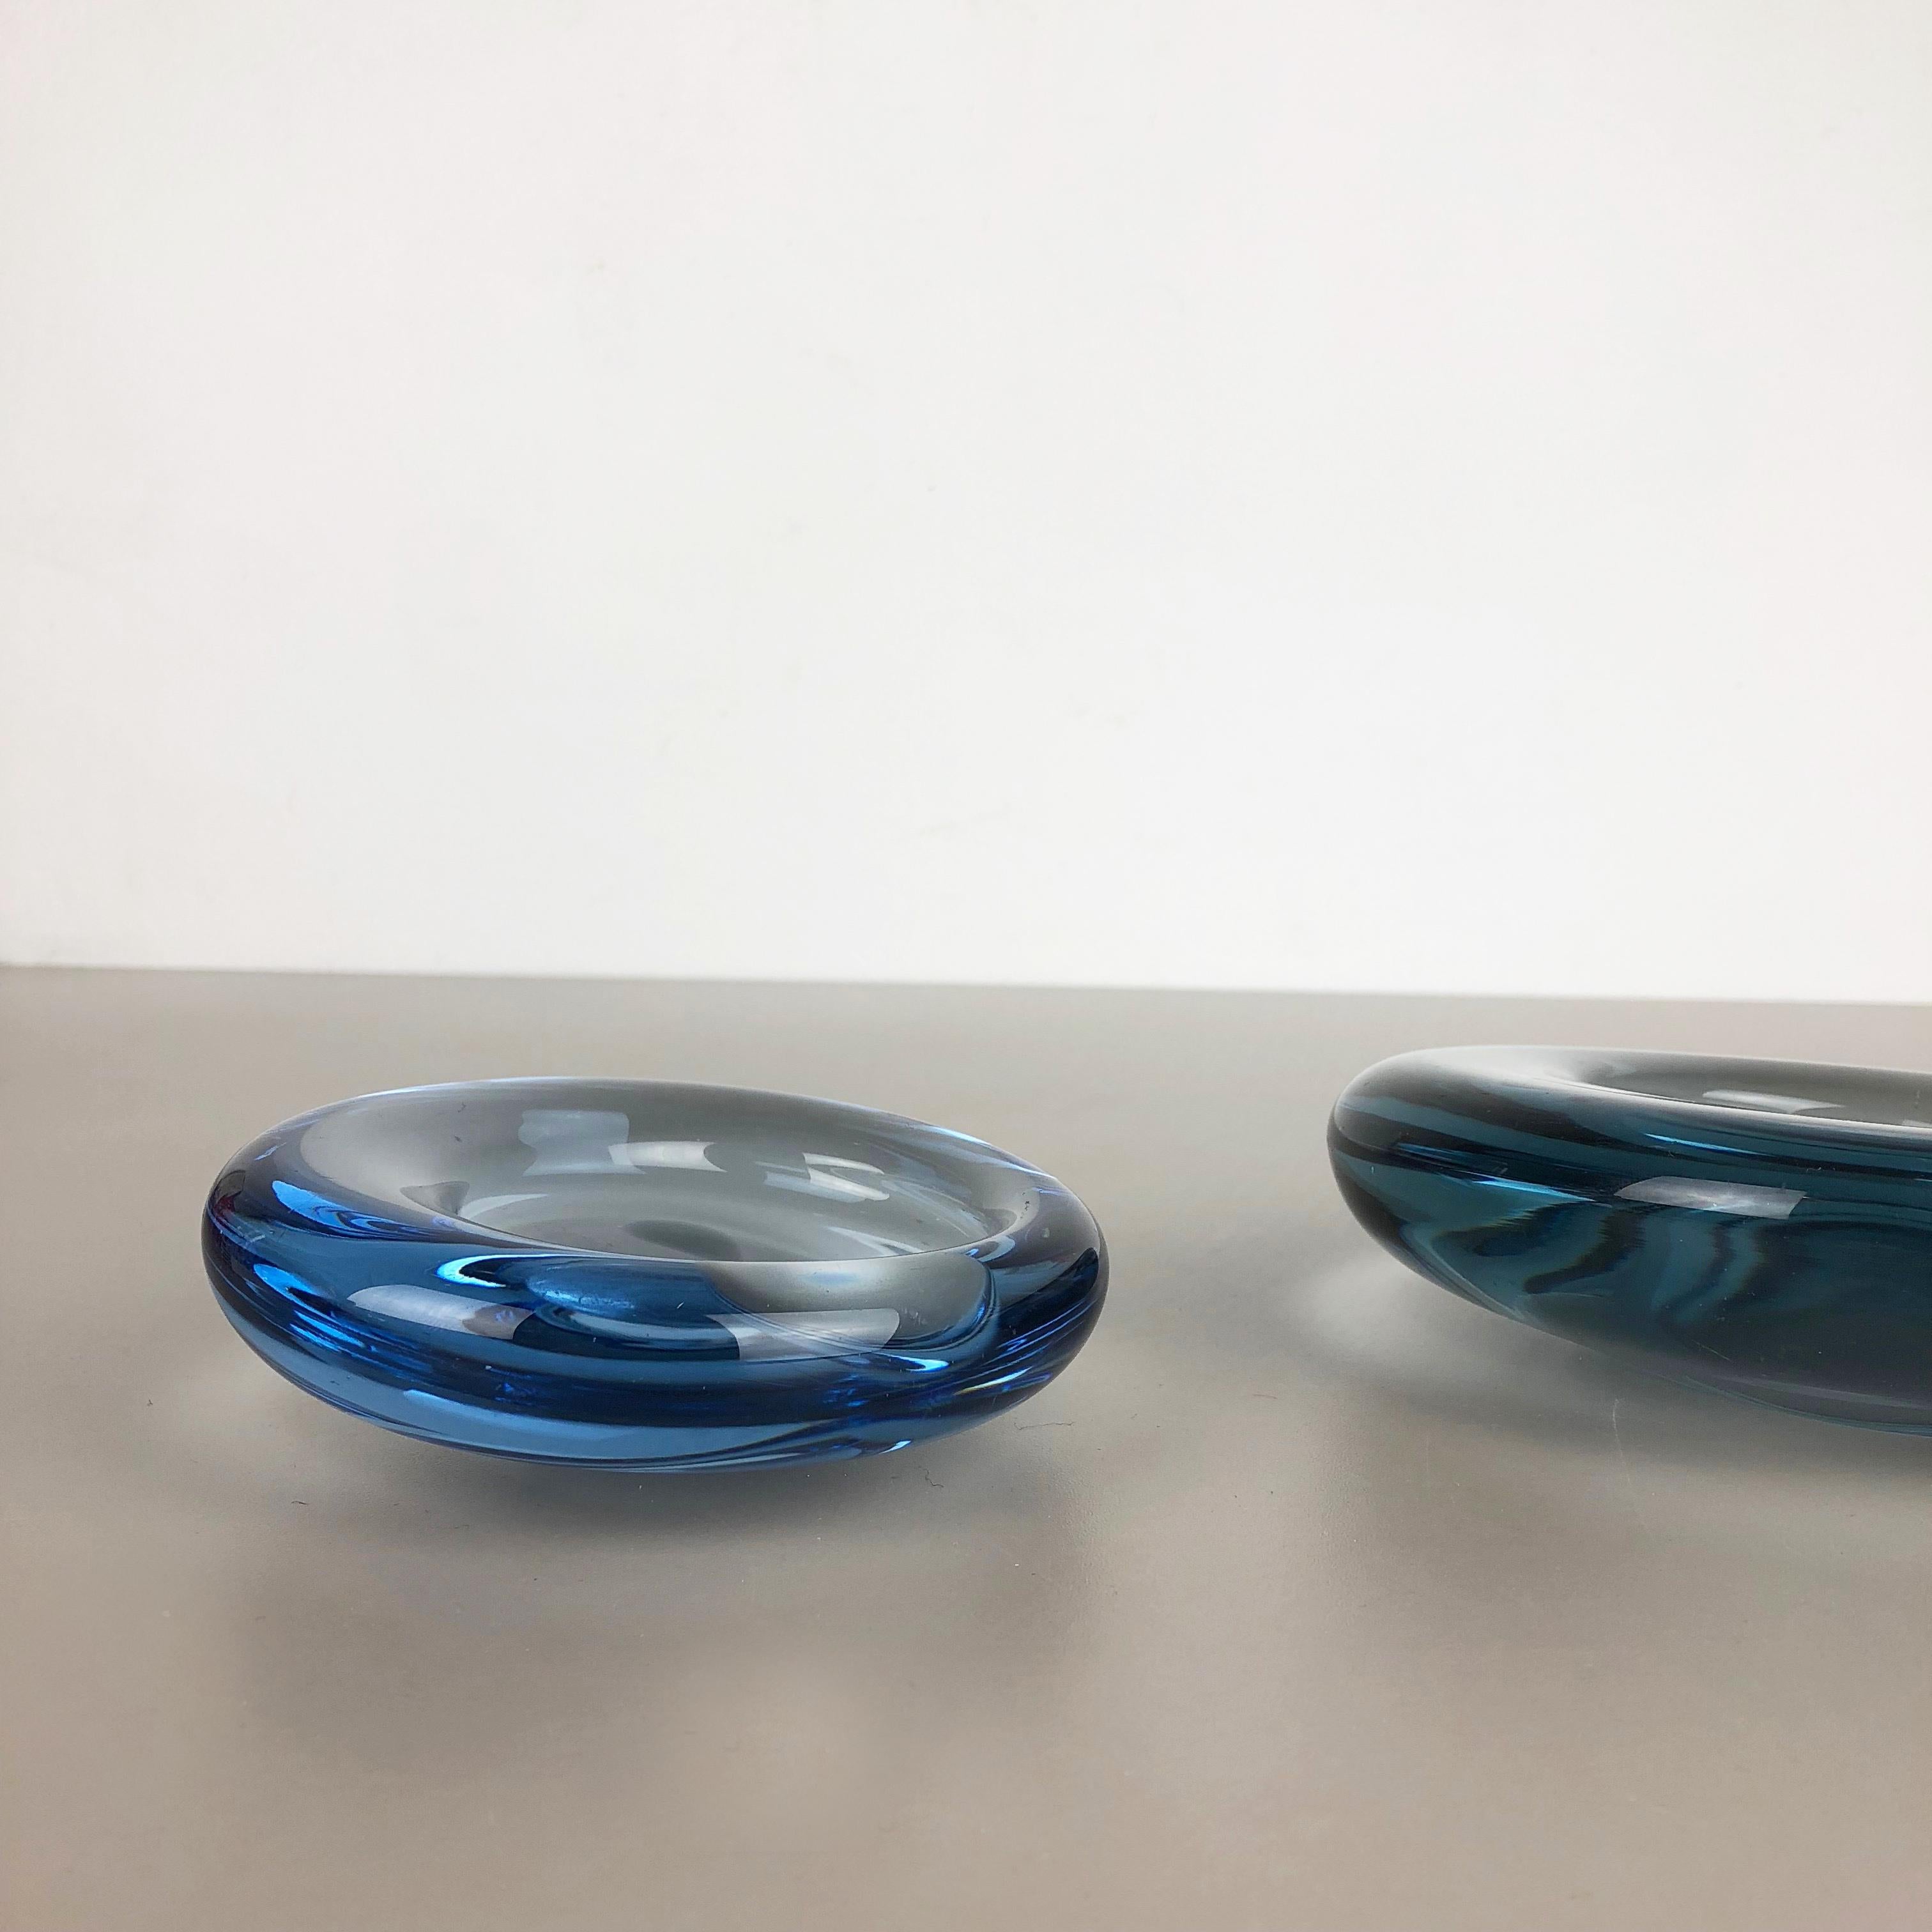 20th Century Set of 2 Glass Shell Bowl Elements by Per Lutken for Holmegaard. Denmark, 1960s